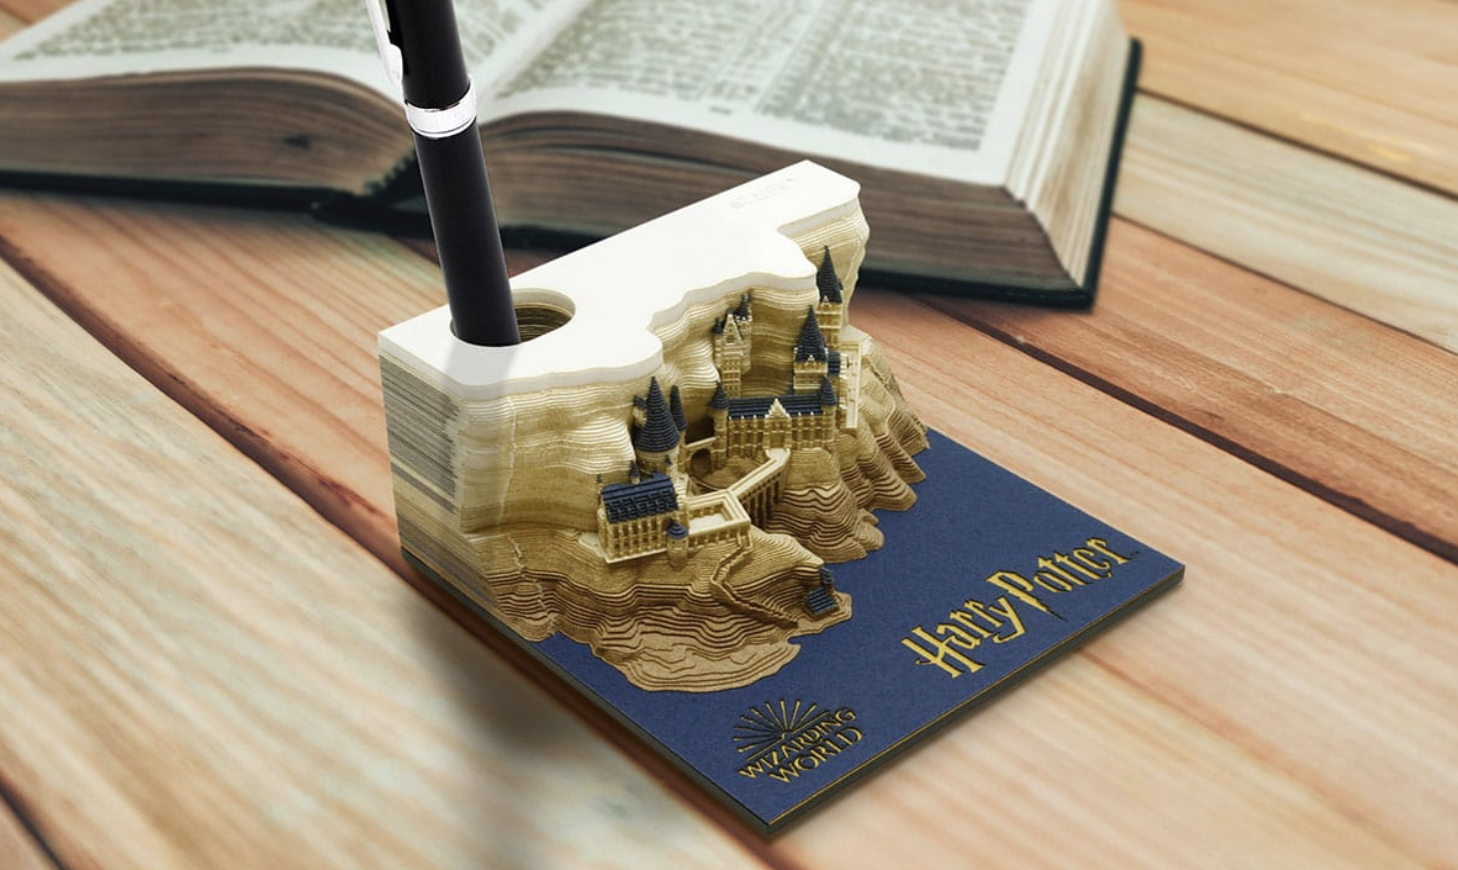 Harry Potter Memo Pad Reveal Embedded Hogwarts Castle The More You Use It Japan Today